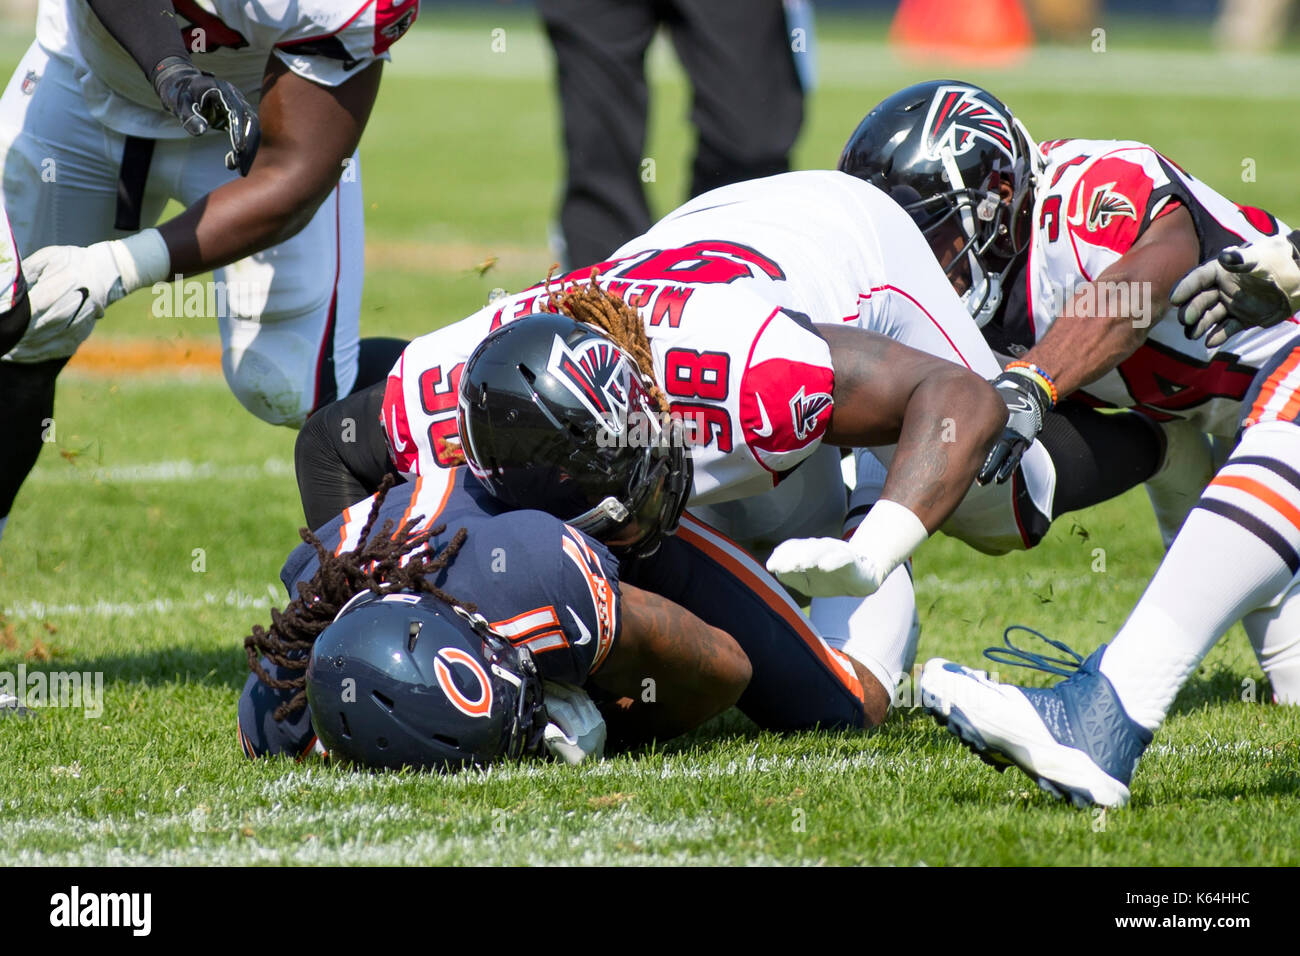 Chicago, Illinois, USA. 10th Sep, 2017. - Chicago Bears #11 Kevin White gets driven into the ground by Atlanta Falcons #98 Takkarist McKinley resulting in White's broken left collarbone during the NFL Game between the Atlanta Falcons and Chicago Bears at Soldier Field in Chicago, IL. Credit: csm/Alamy Live News Stock Photo